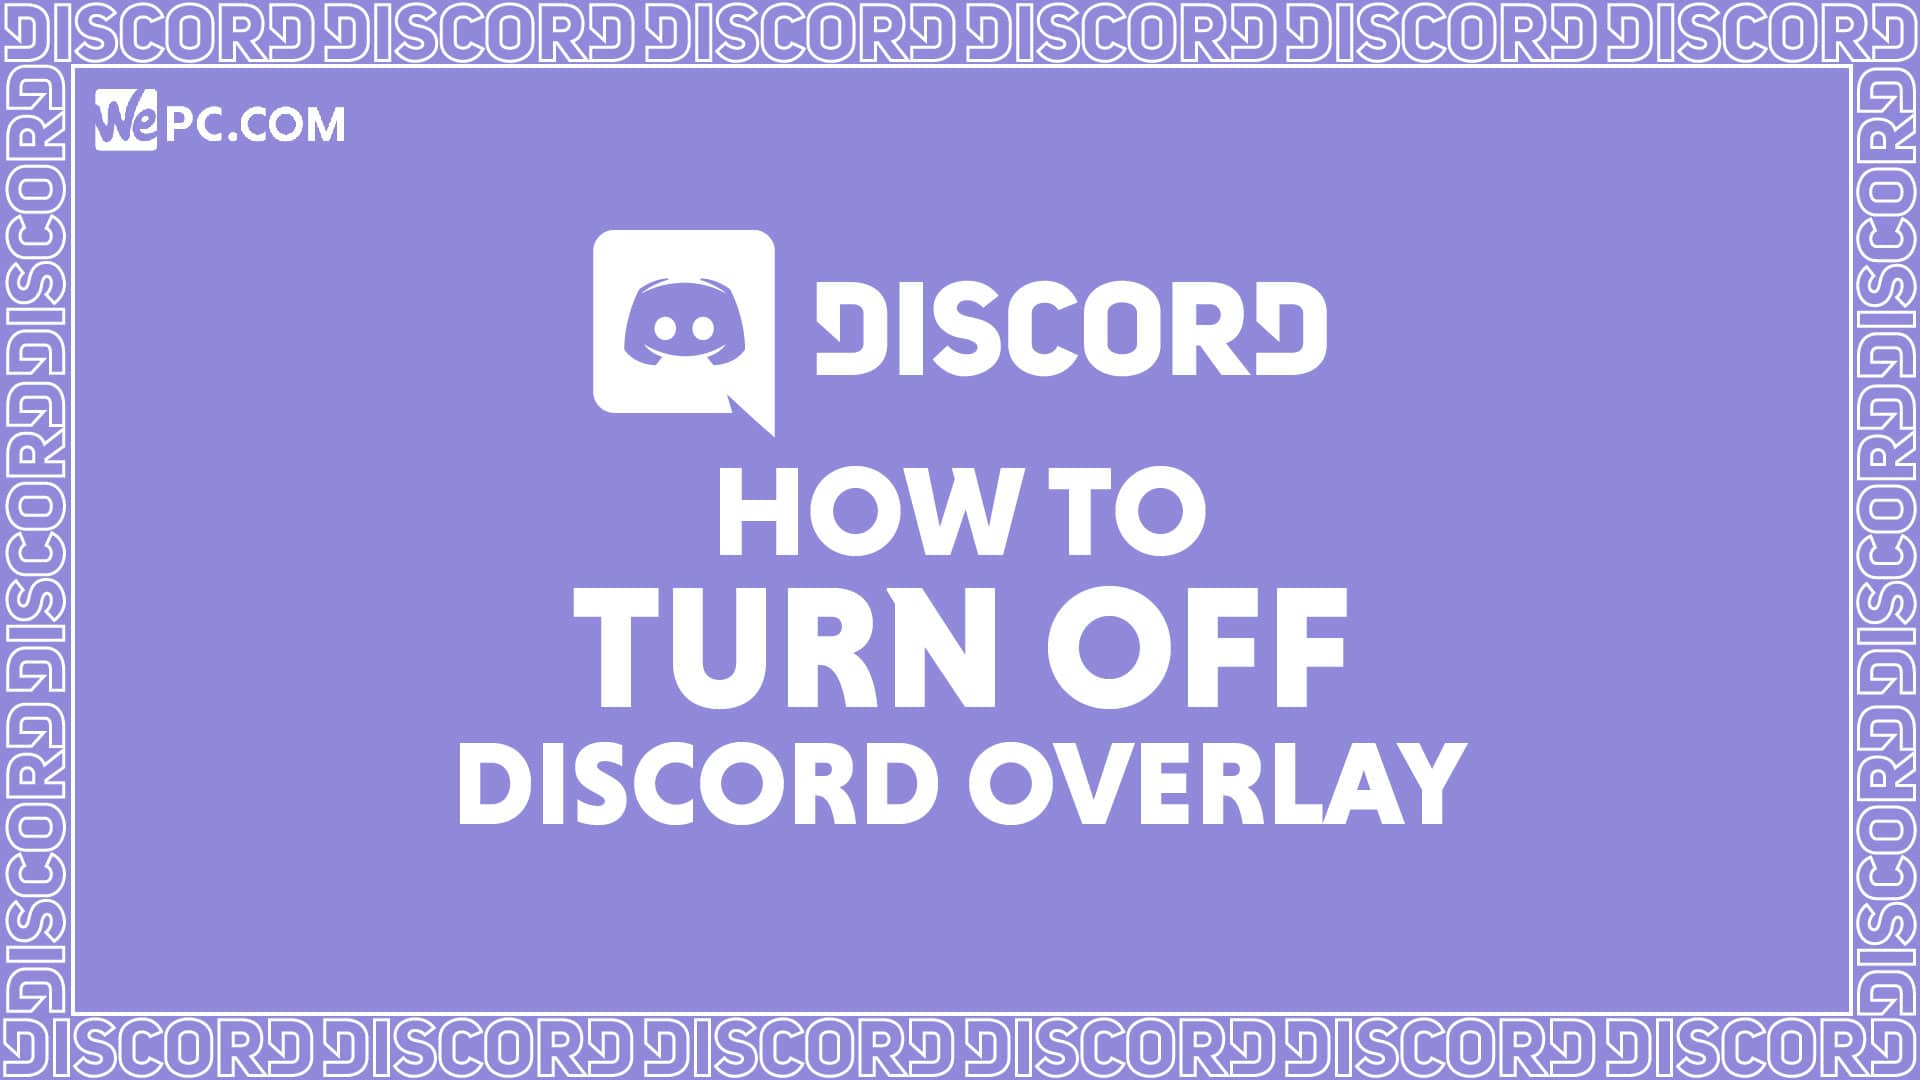 how to turn off email notifications on discord